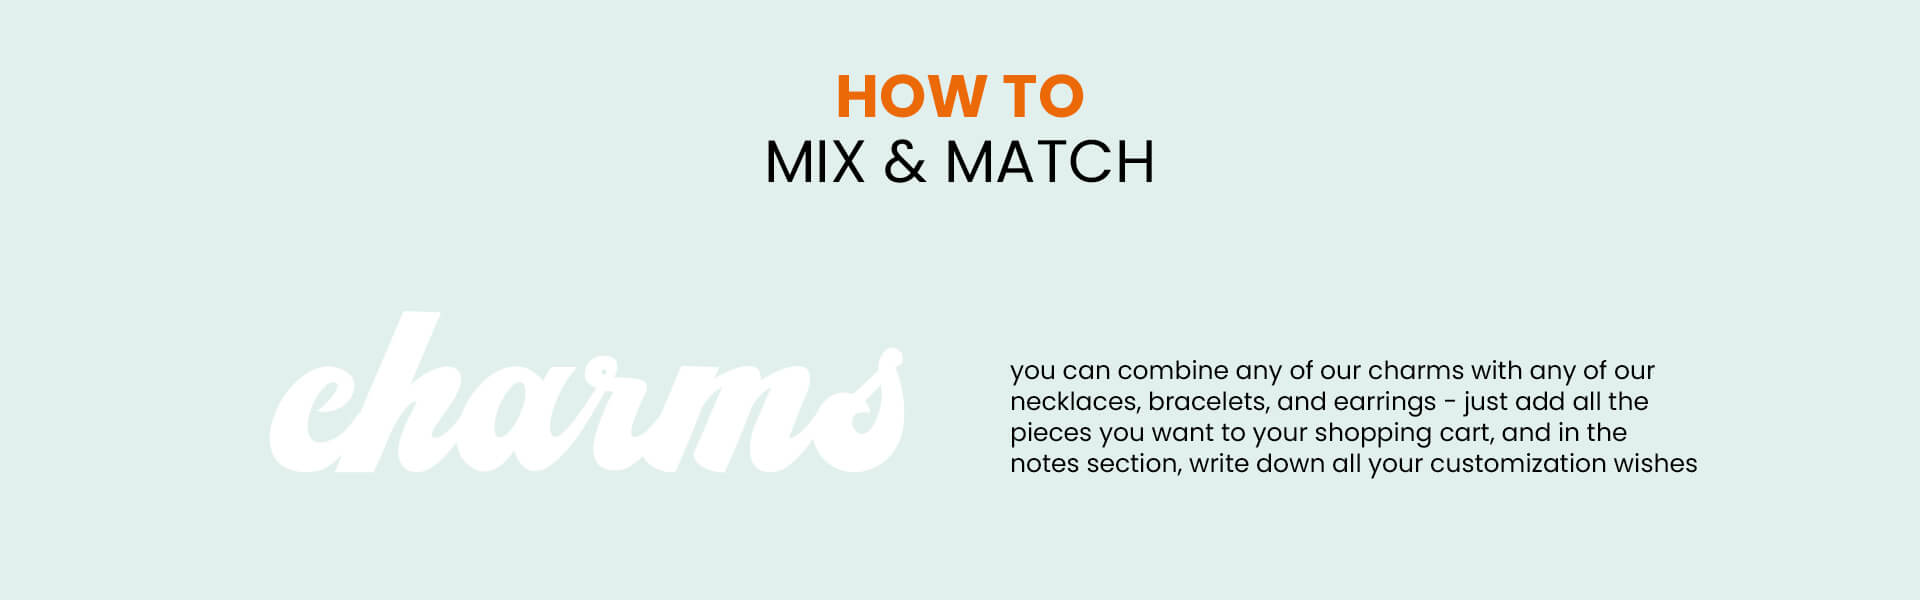 how to mix and match charms